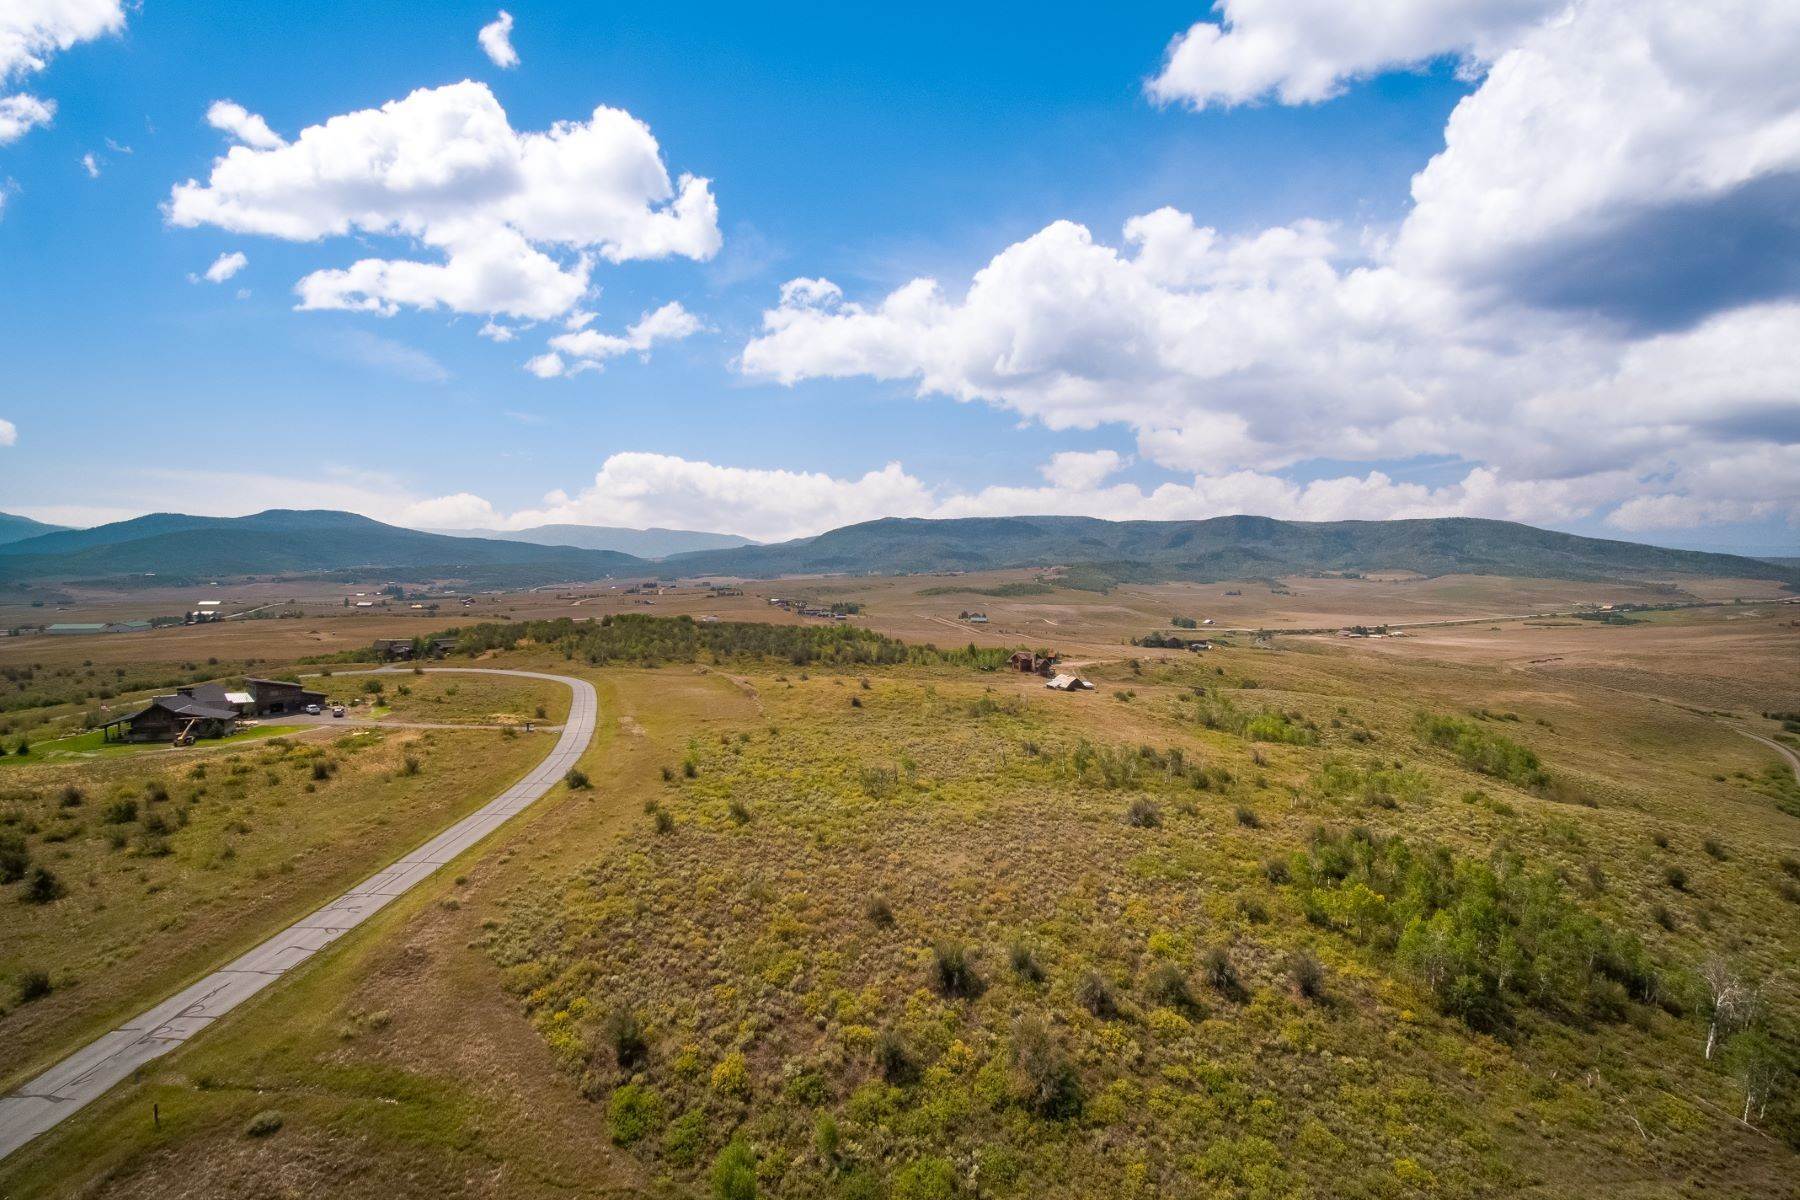 Property for Sale at Lot at Sidney Peak Ranch 30575 Marshall Ridge Steamboat Springs, Colorado 80487 United States